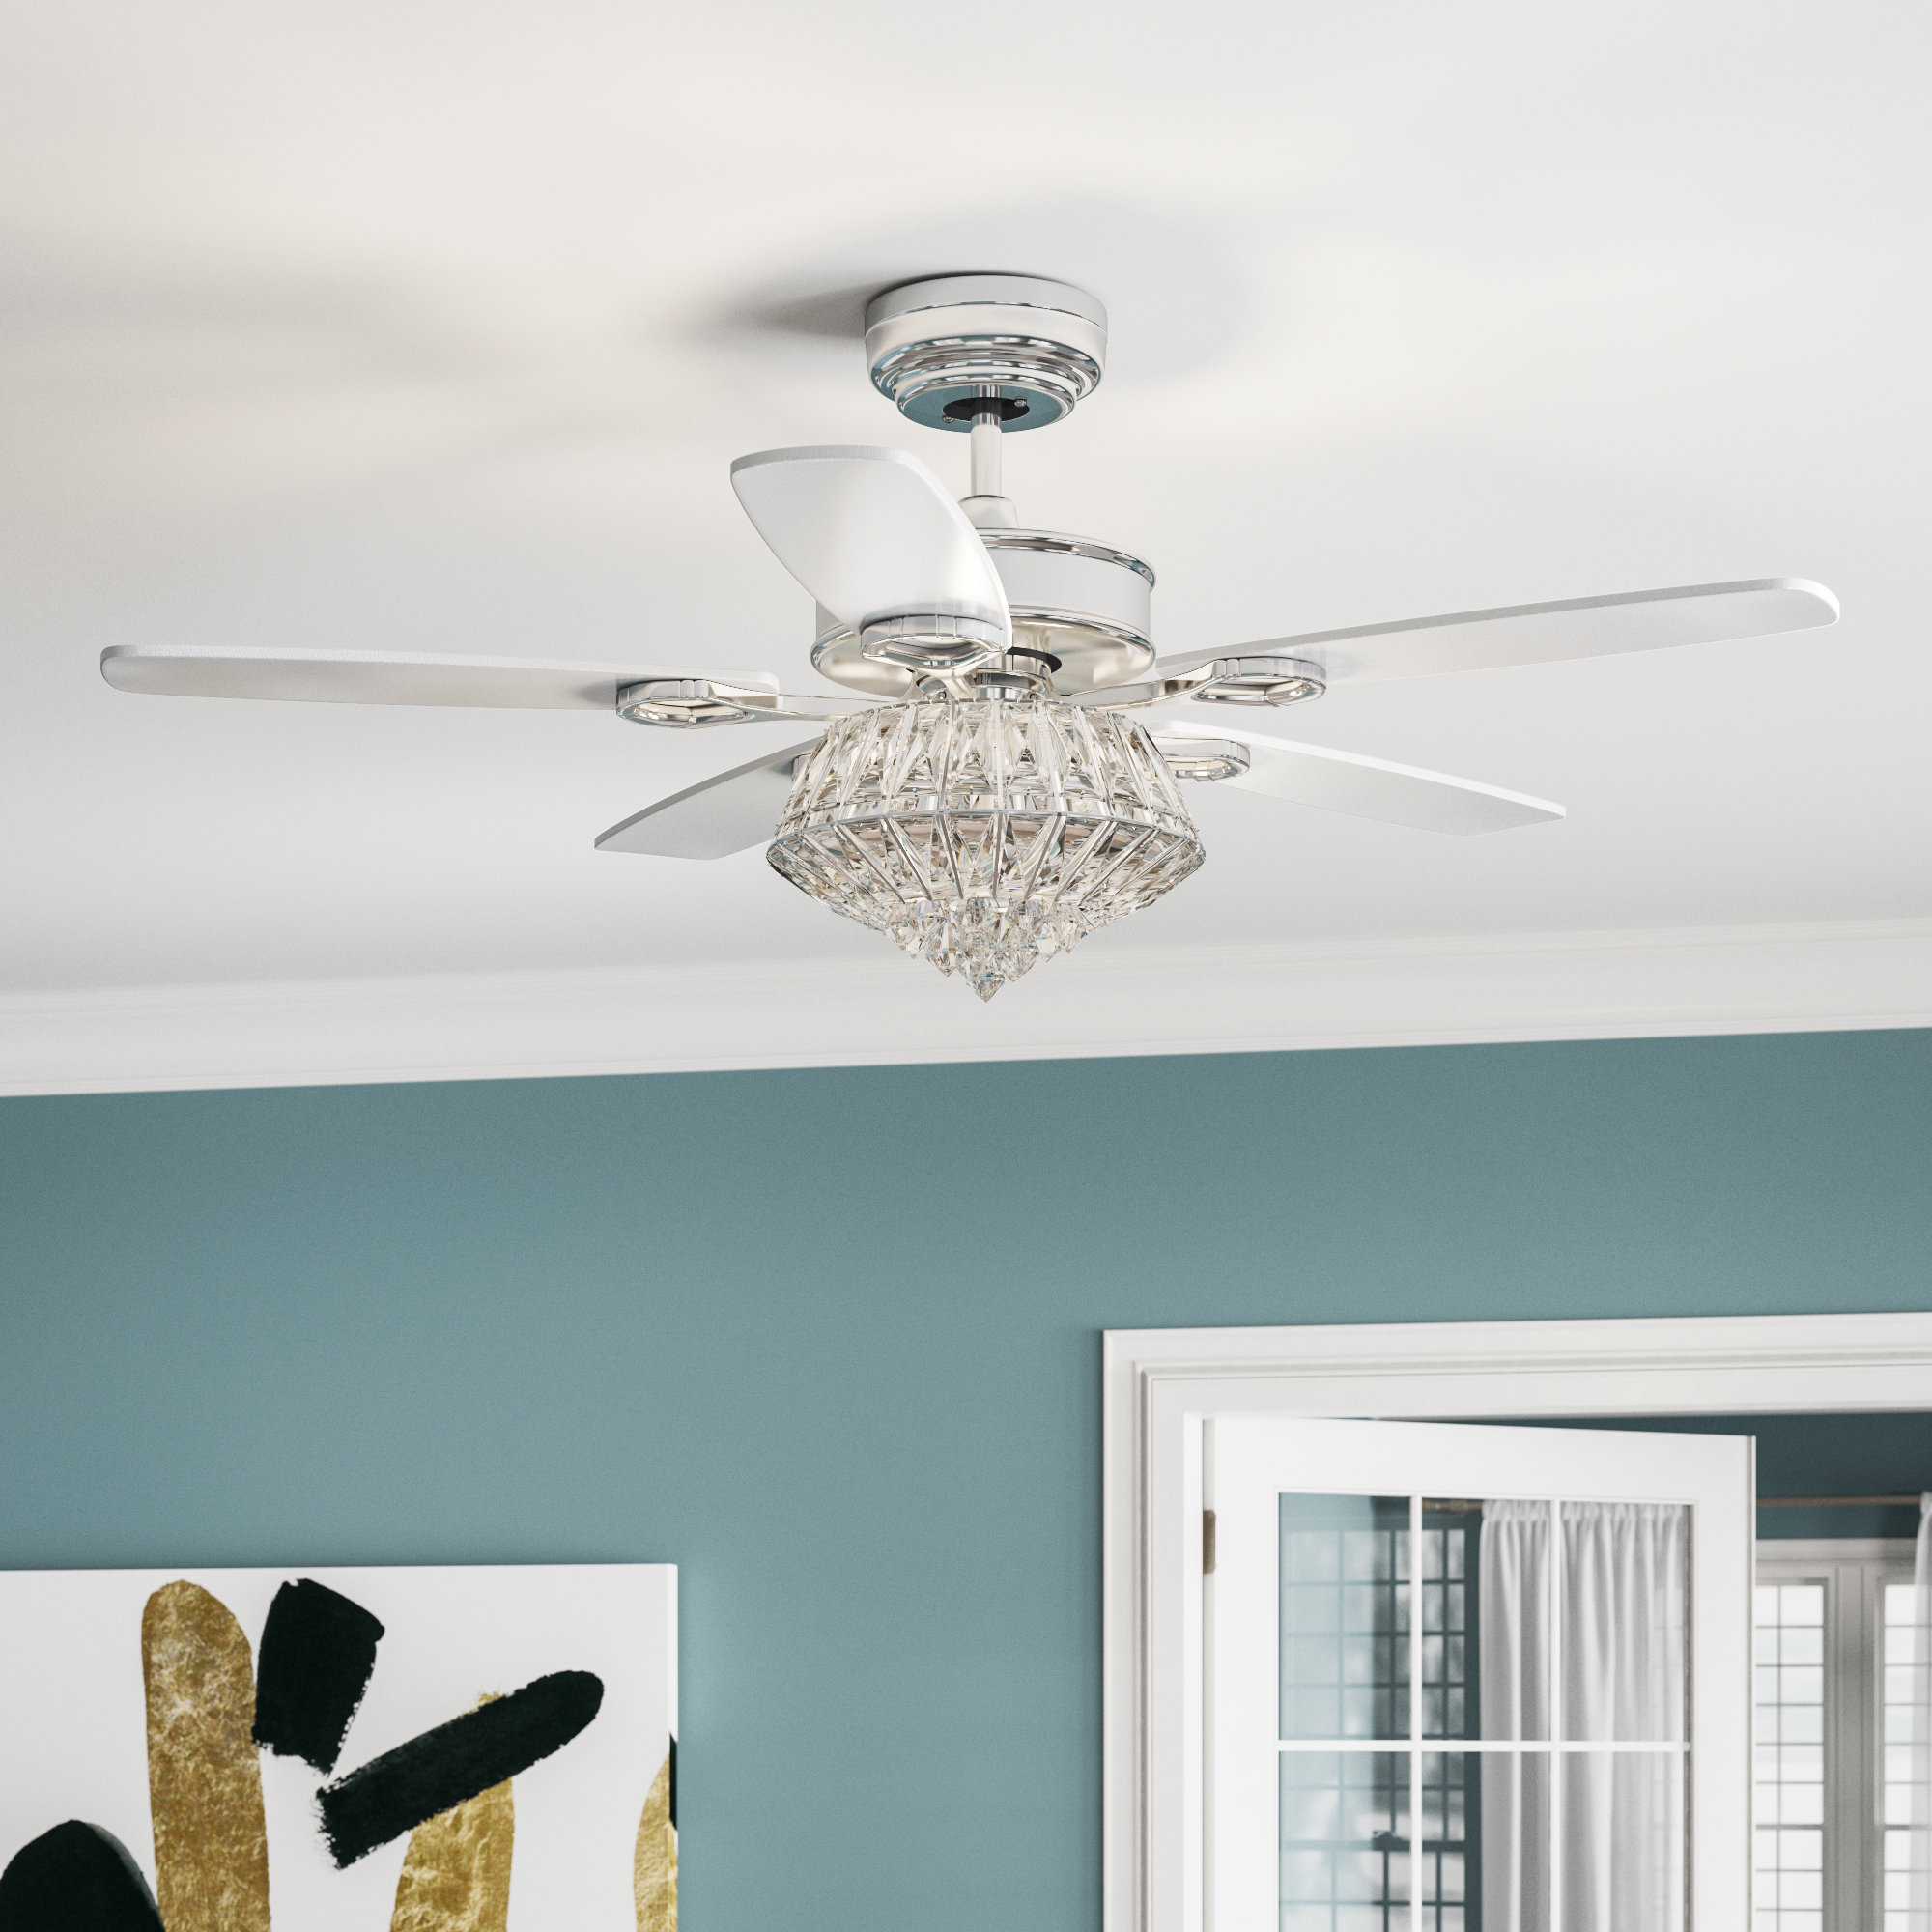 House Of Hampton 48 Steadman 5 Blade Crystal Ceiling Fan With Remote Control And Light Kit Included Reviews Wayfair,Green House Paint Colors Exterior Ideas